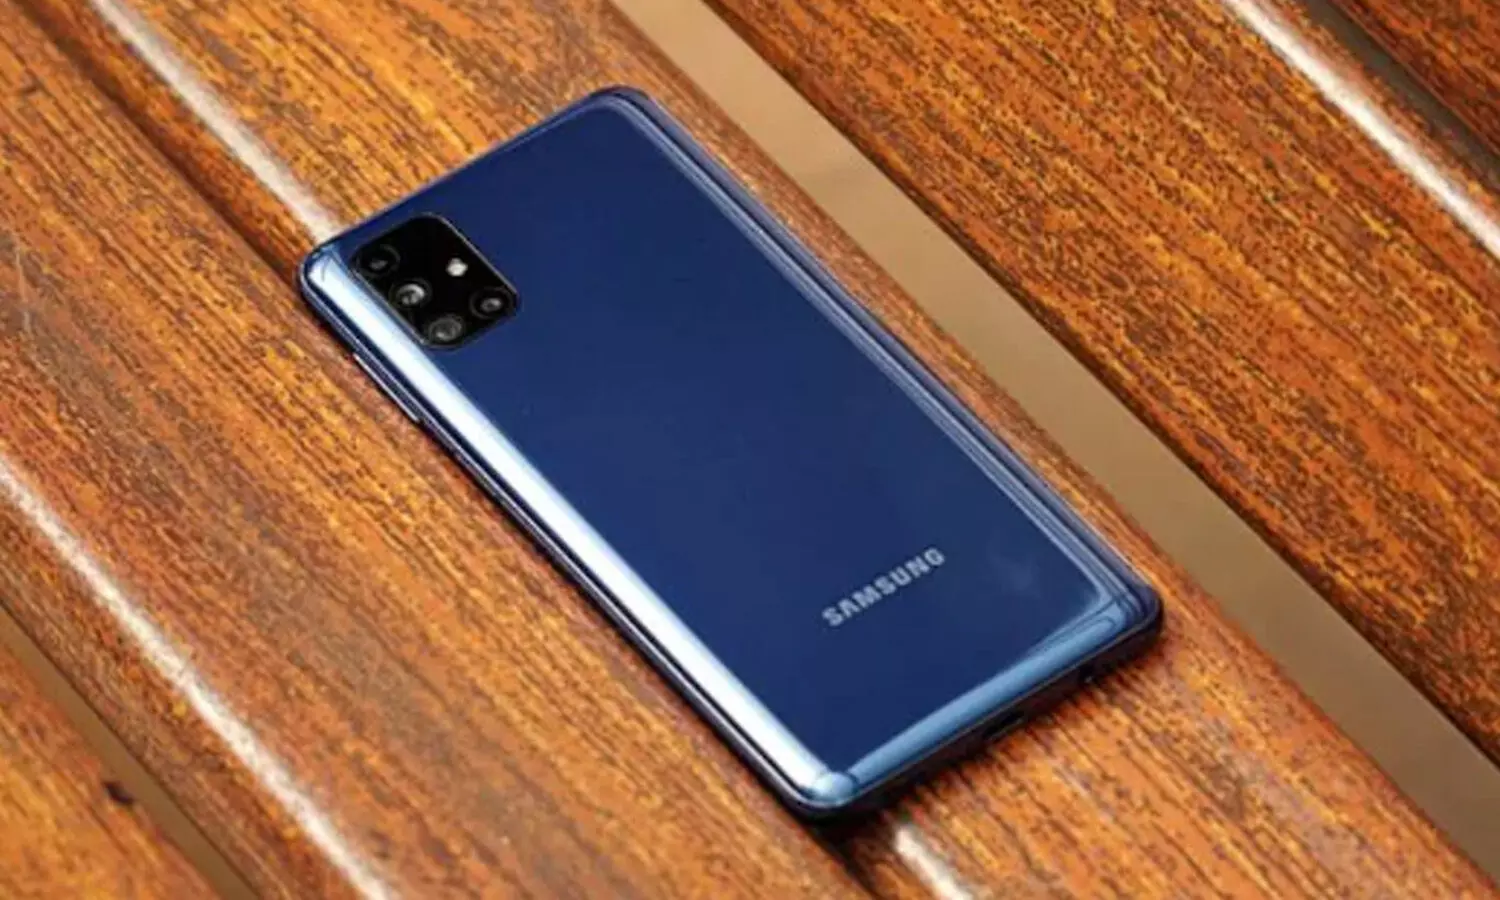 Samsung Galaxy A31 gets new July 2021 Security Update